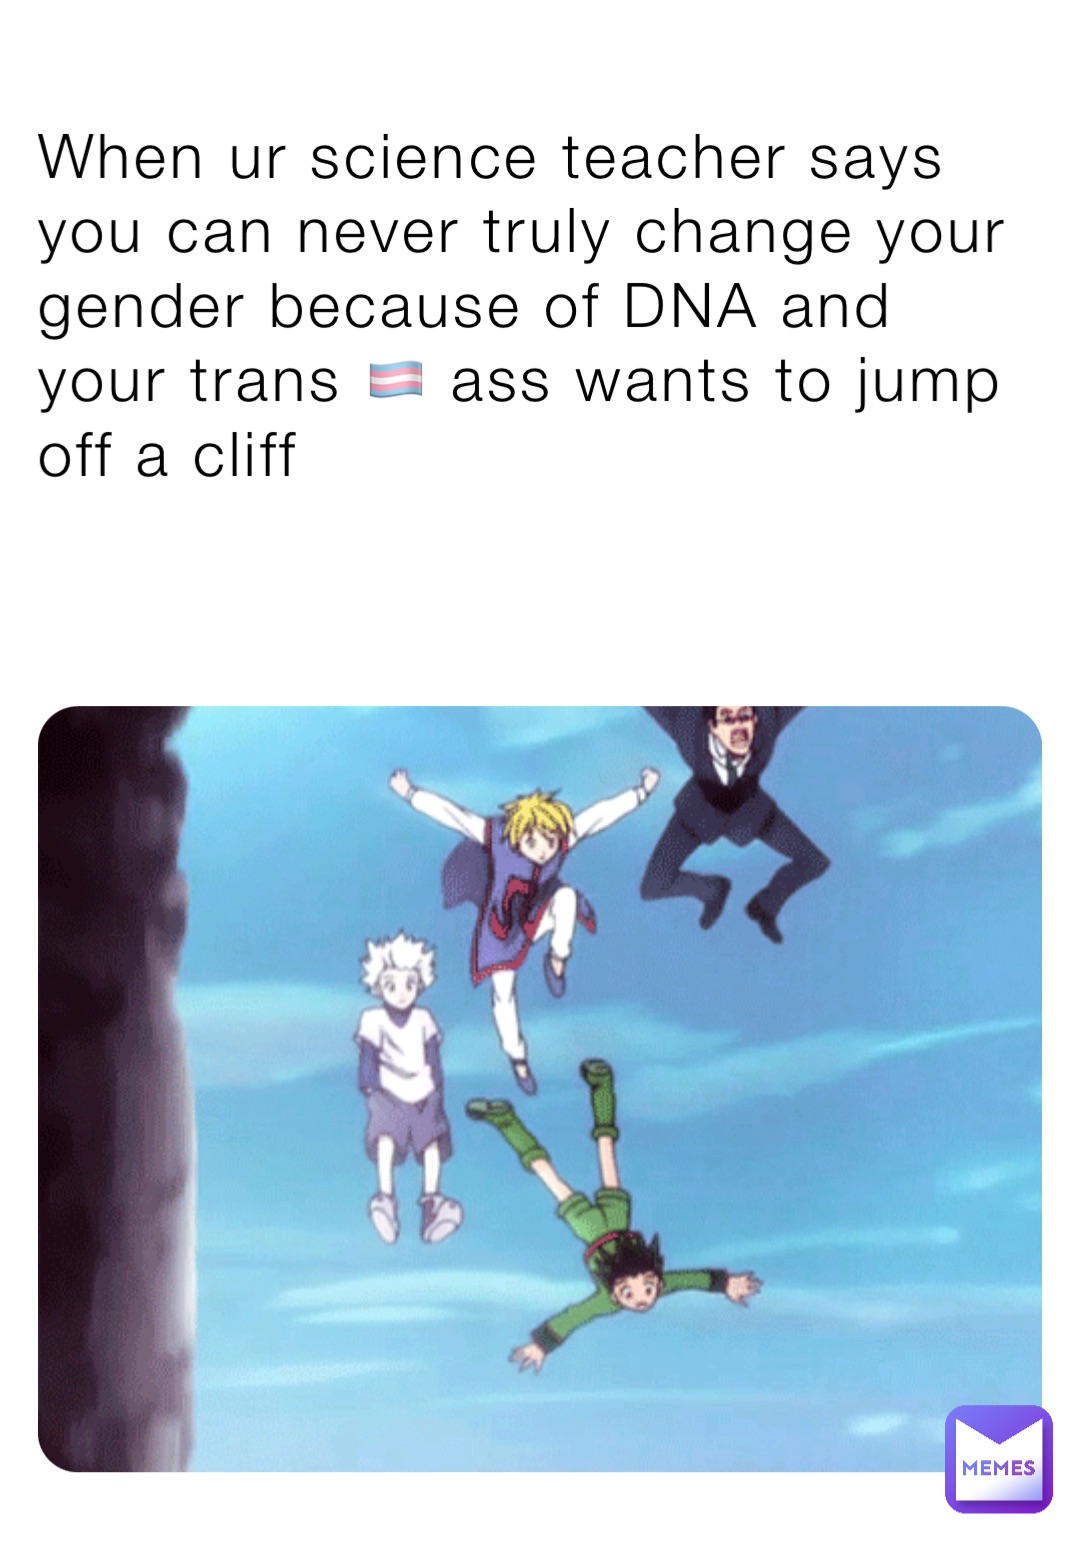 When ur science teacher says you can never truly change your gender because of DNA and your trans 🏳️‍⚧️ ass wants to jump off a cliff 😔